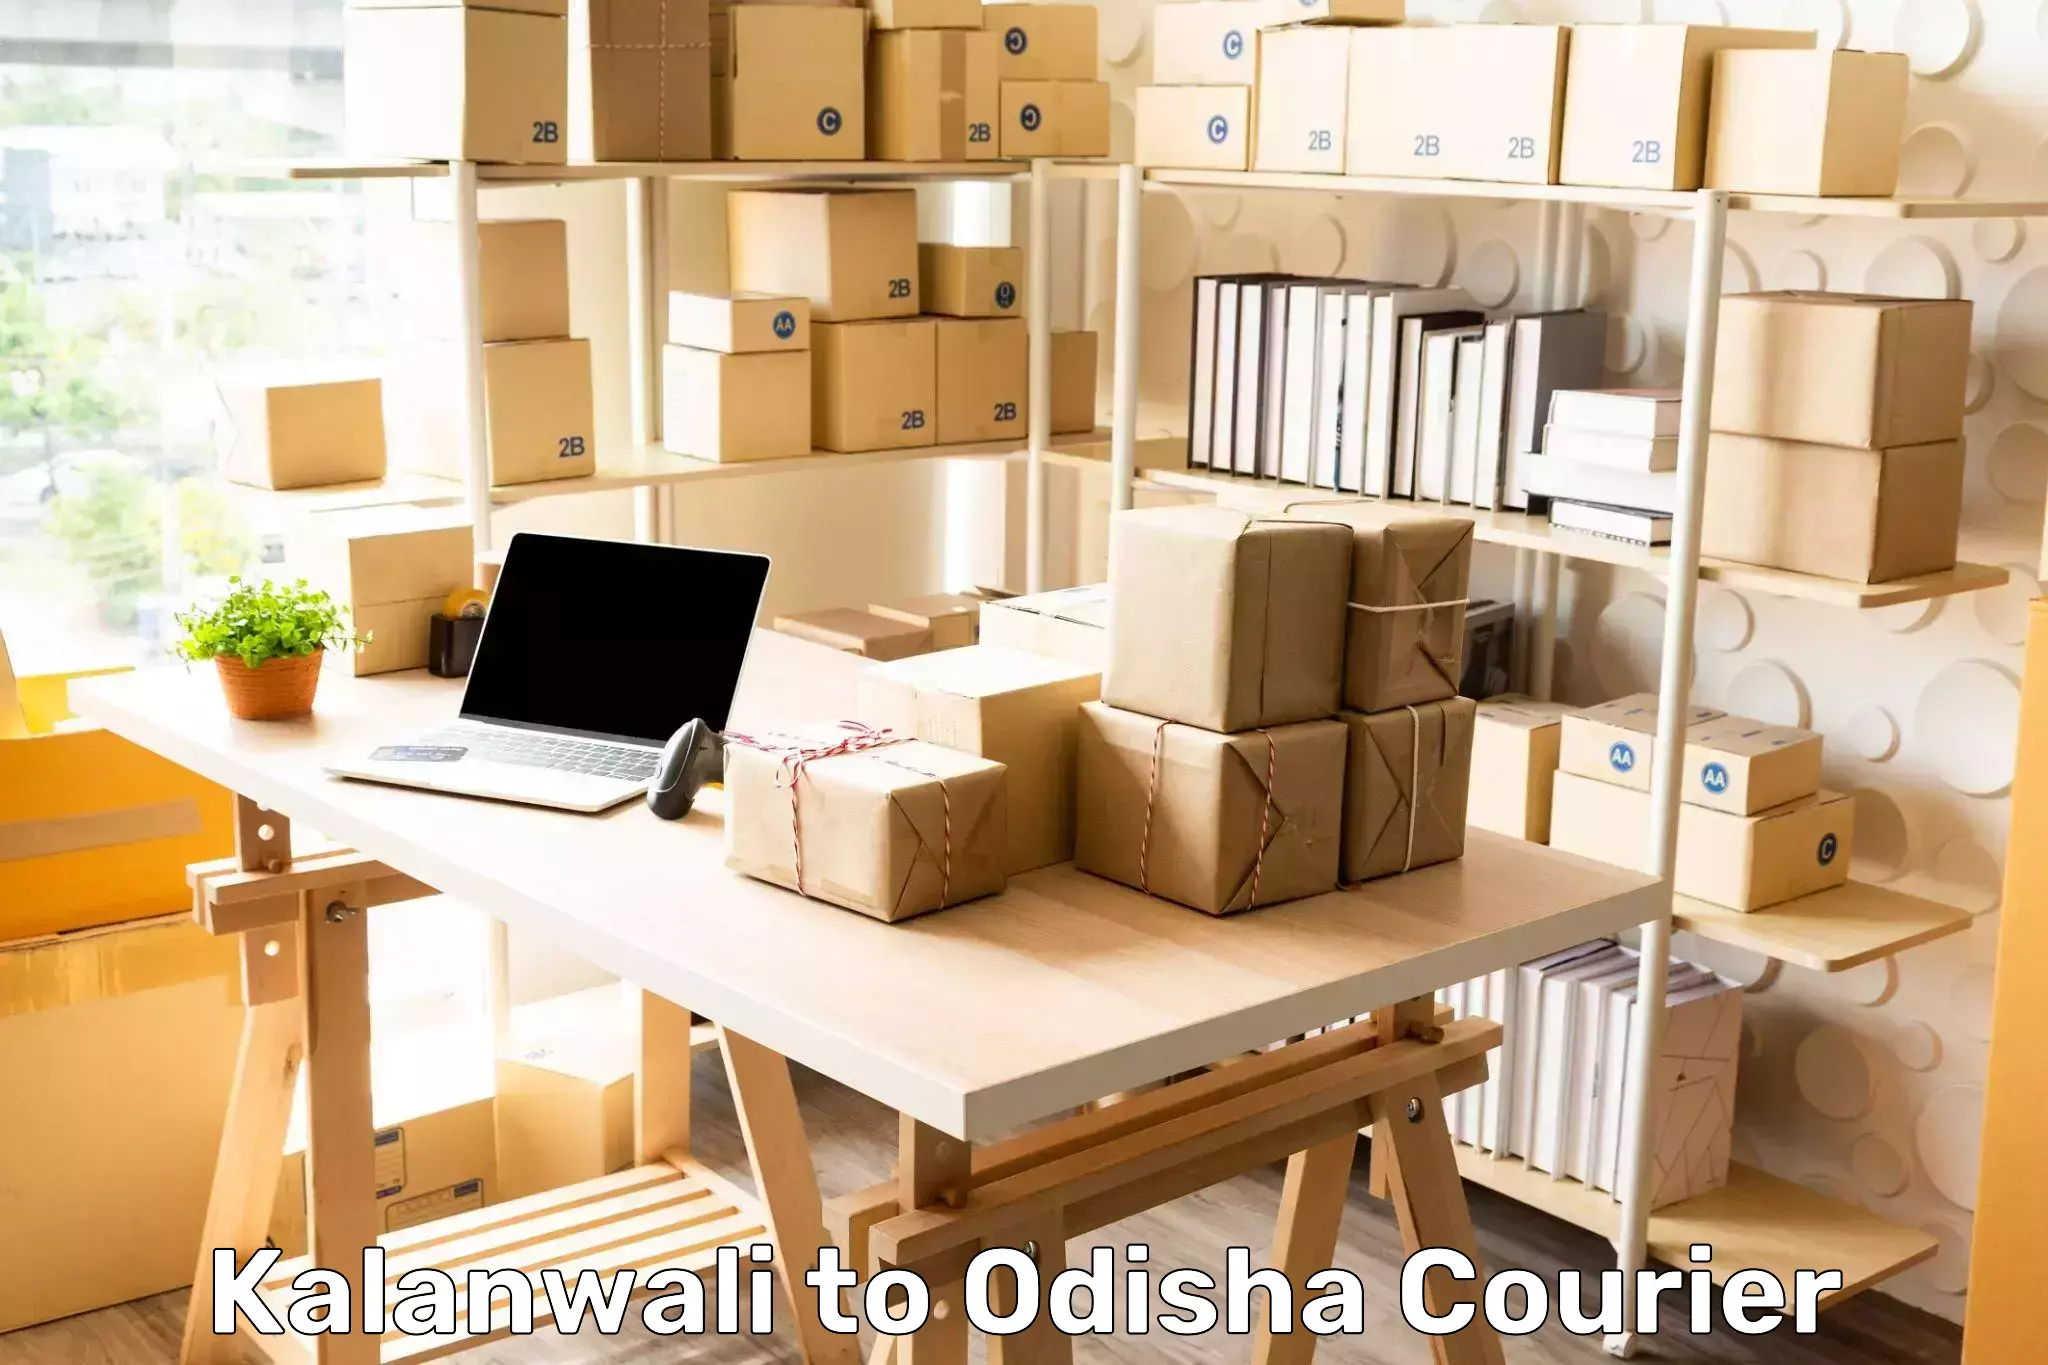 Corporate courier solutions Kalanwali to Keonjhar